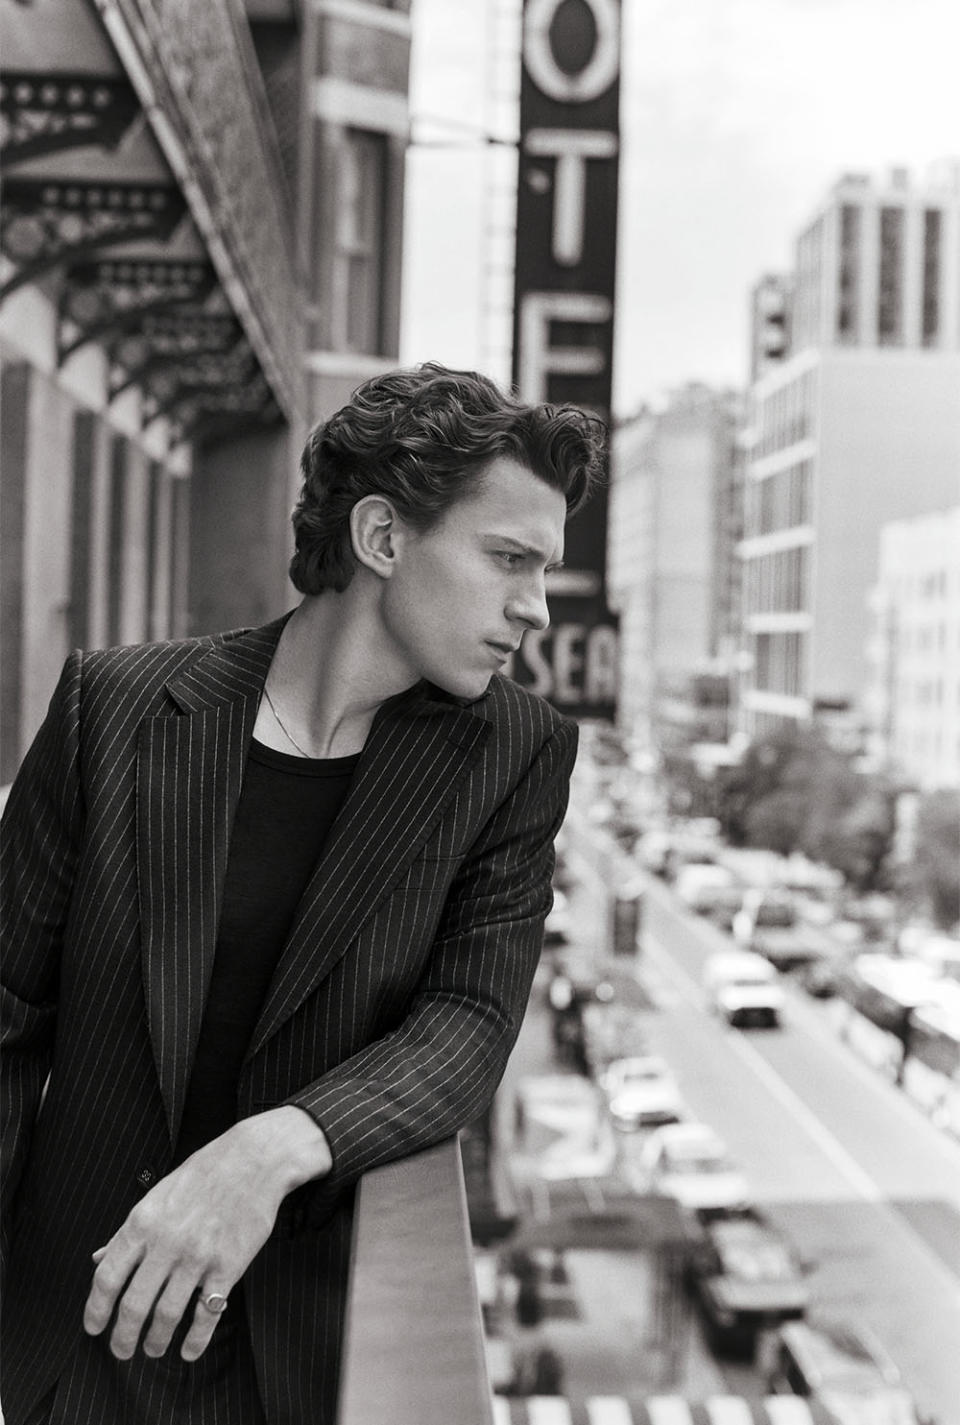 Tom Holland at the Hotel Chelsea in New York.